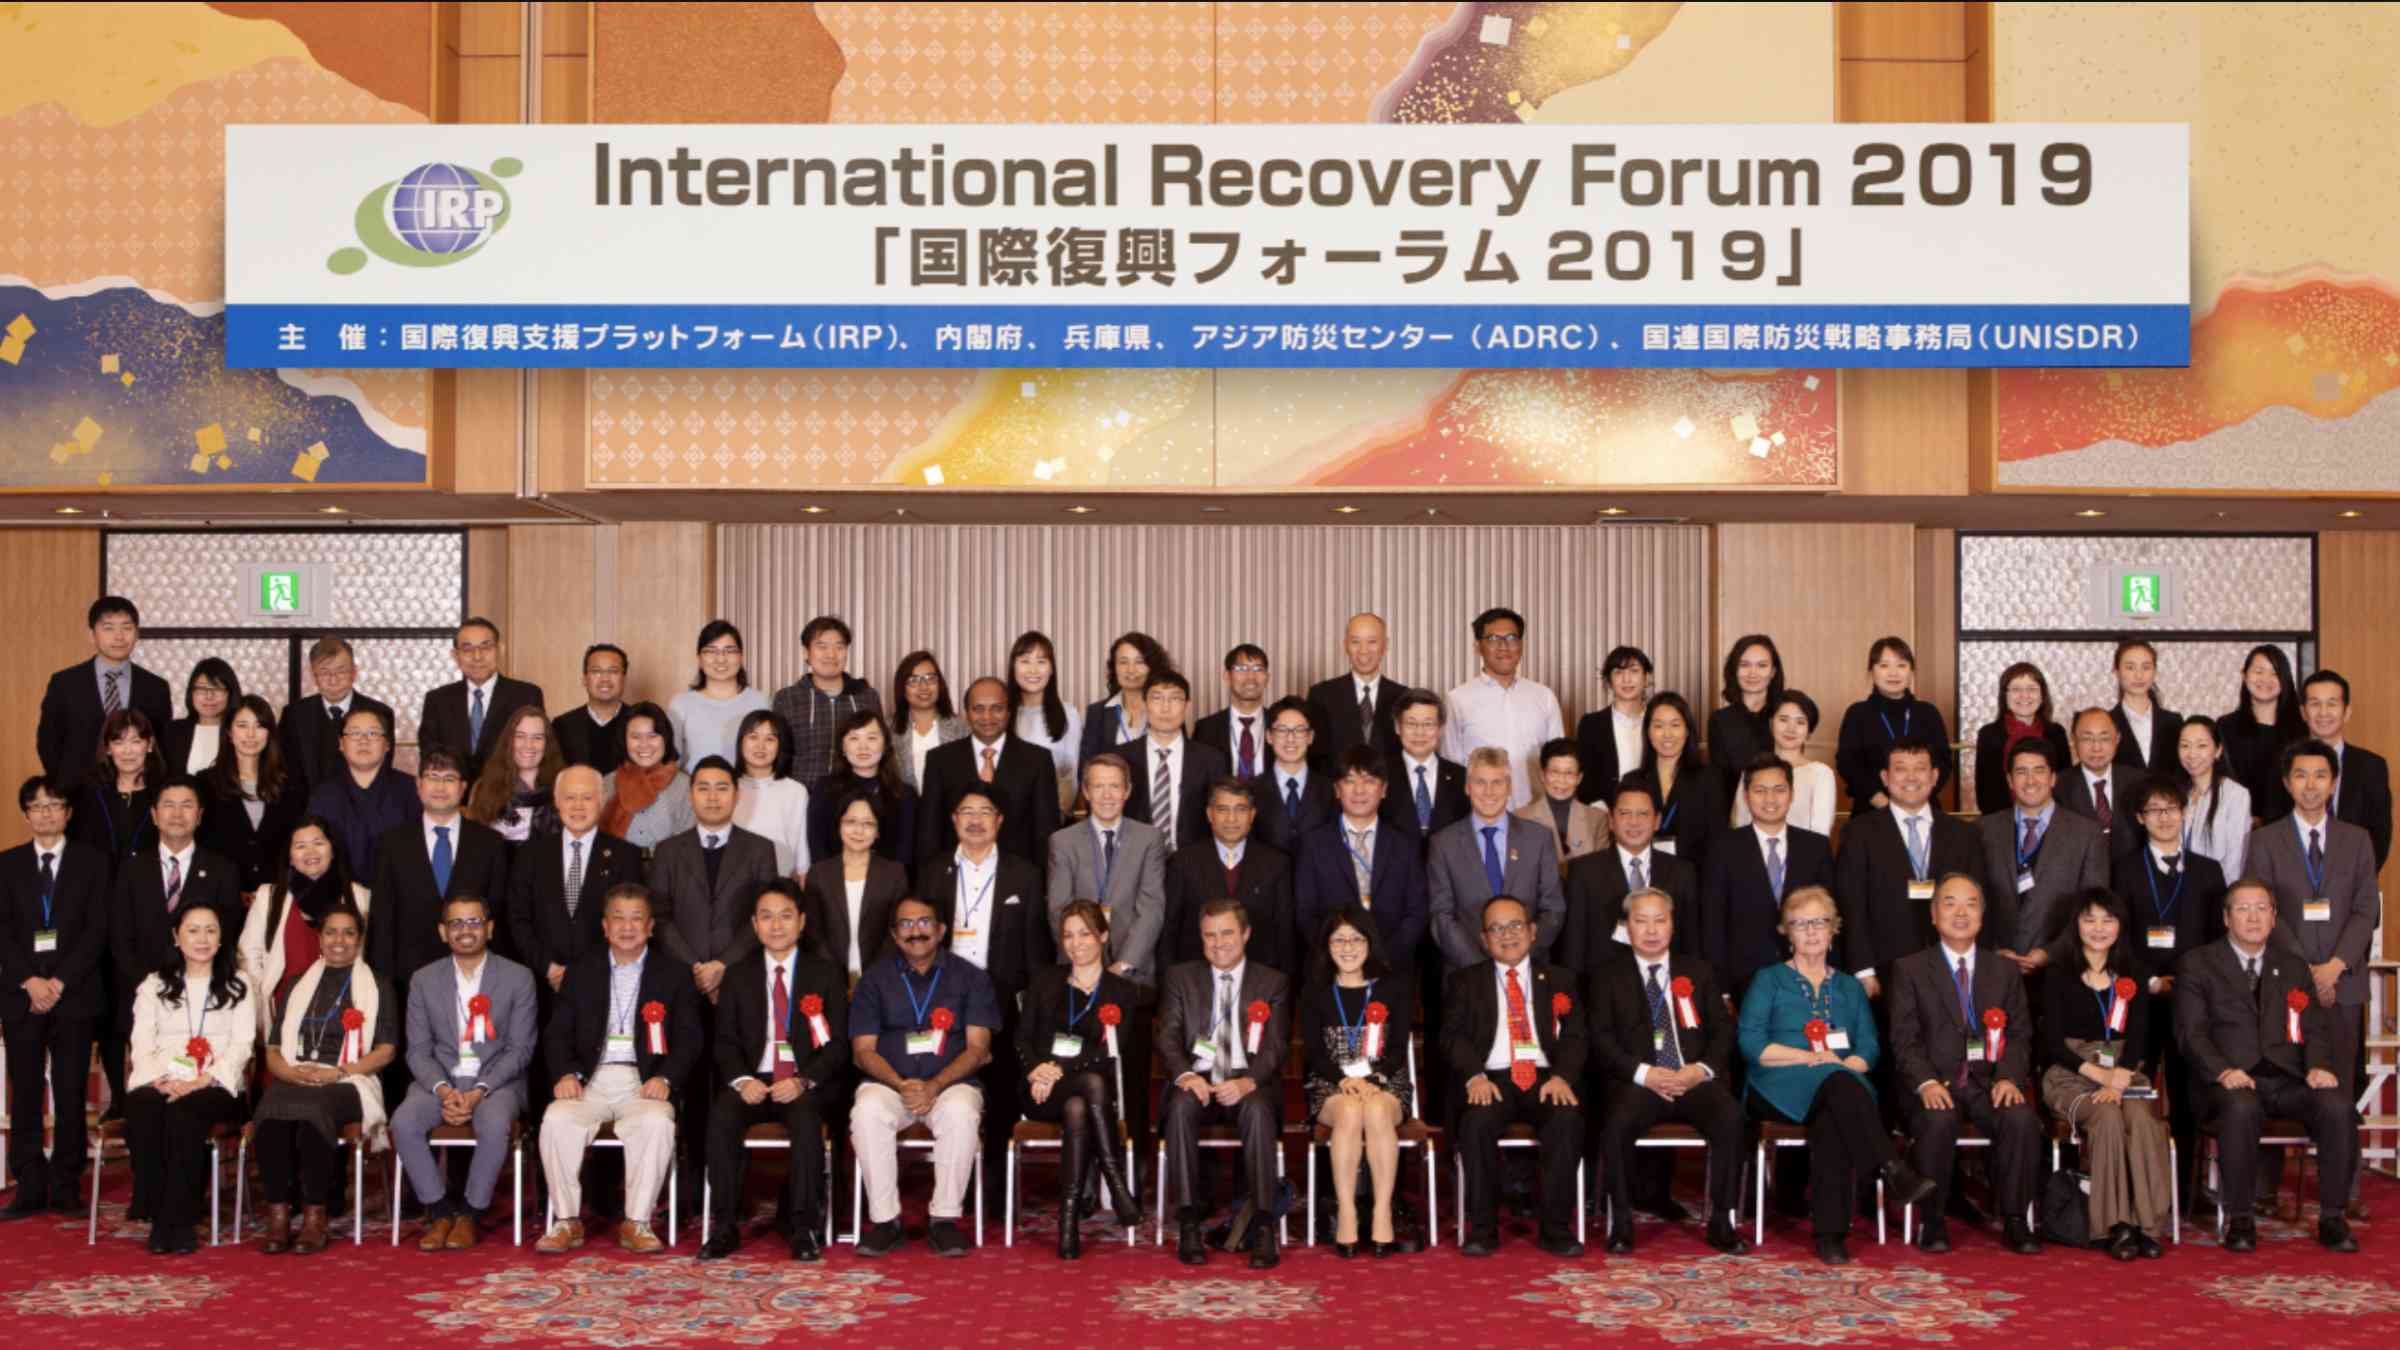 Big group photo under banner for IRP forum 2019